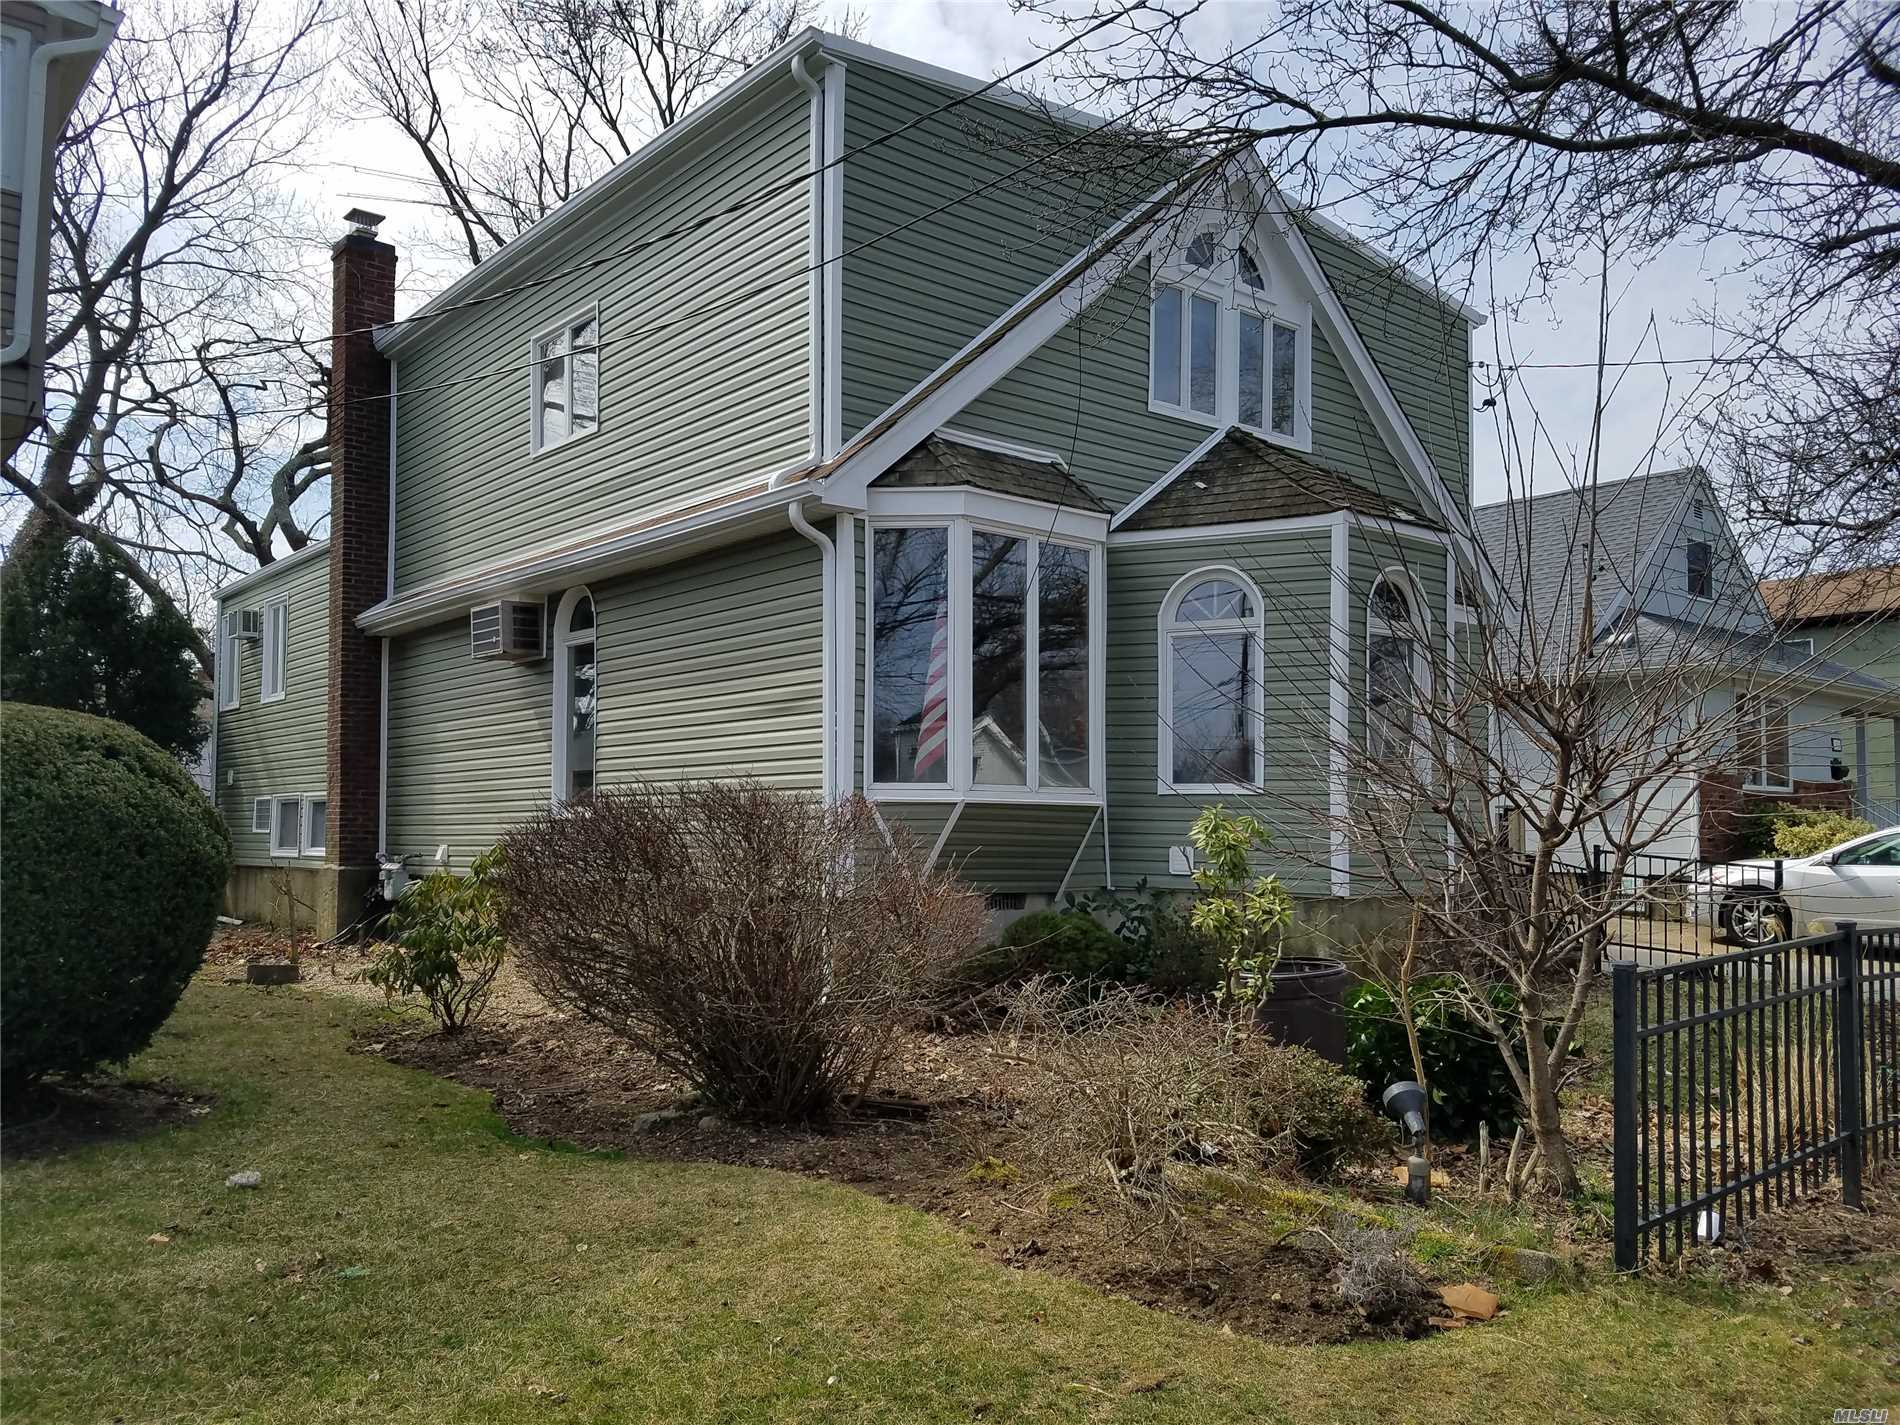 Large Split Level Home In Beautifull Baldwin Harbor. Great House In A Great Neighborhood, Featuring 4 Bedrooms, 2.5 Bathrooms, Finished Basement With 2 Rooms And A 1/2 Bath, Separated Entrance, Rear Wooden Deck, Baldwin Schools, Close To All.